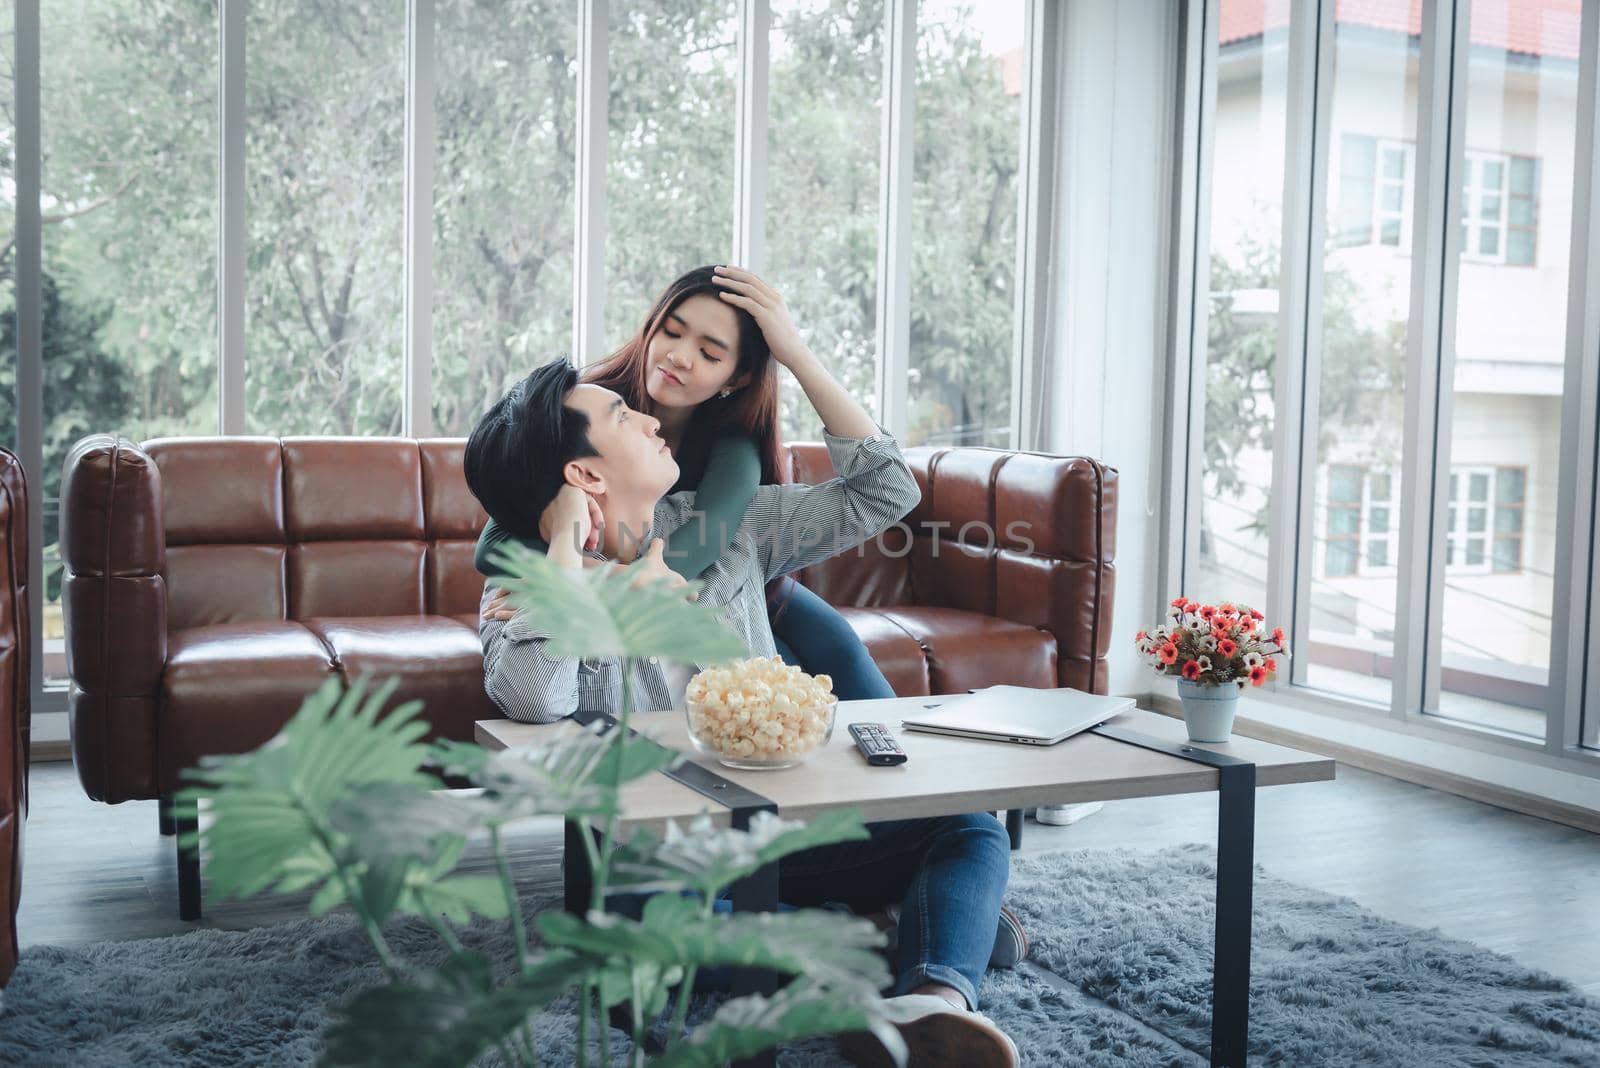 Couple Love Having Coronavirus Covid-19 Quarantine at Home, Portrait of Asian Couple Enjoying in Living Room Together During Quarantined Covid19 at Their House. Couple Relationship Leisure Lifestyle by MahaHeang245789